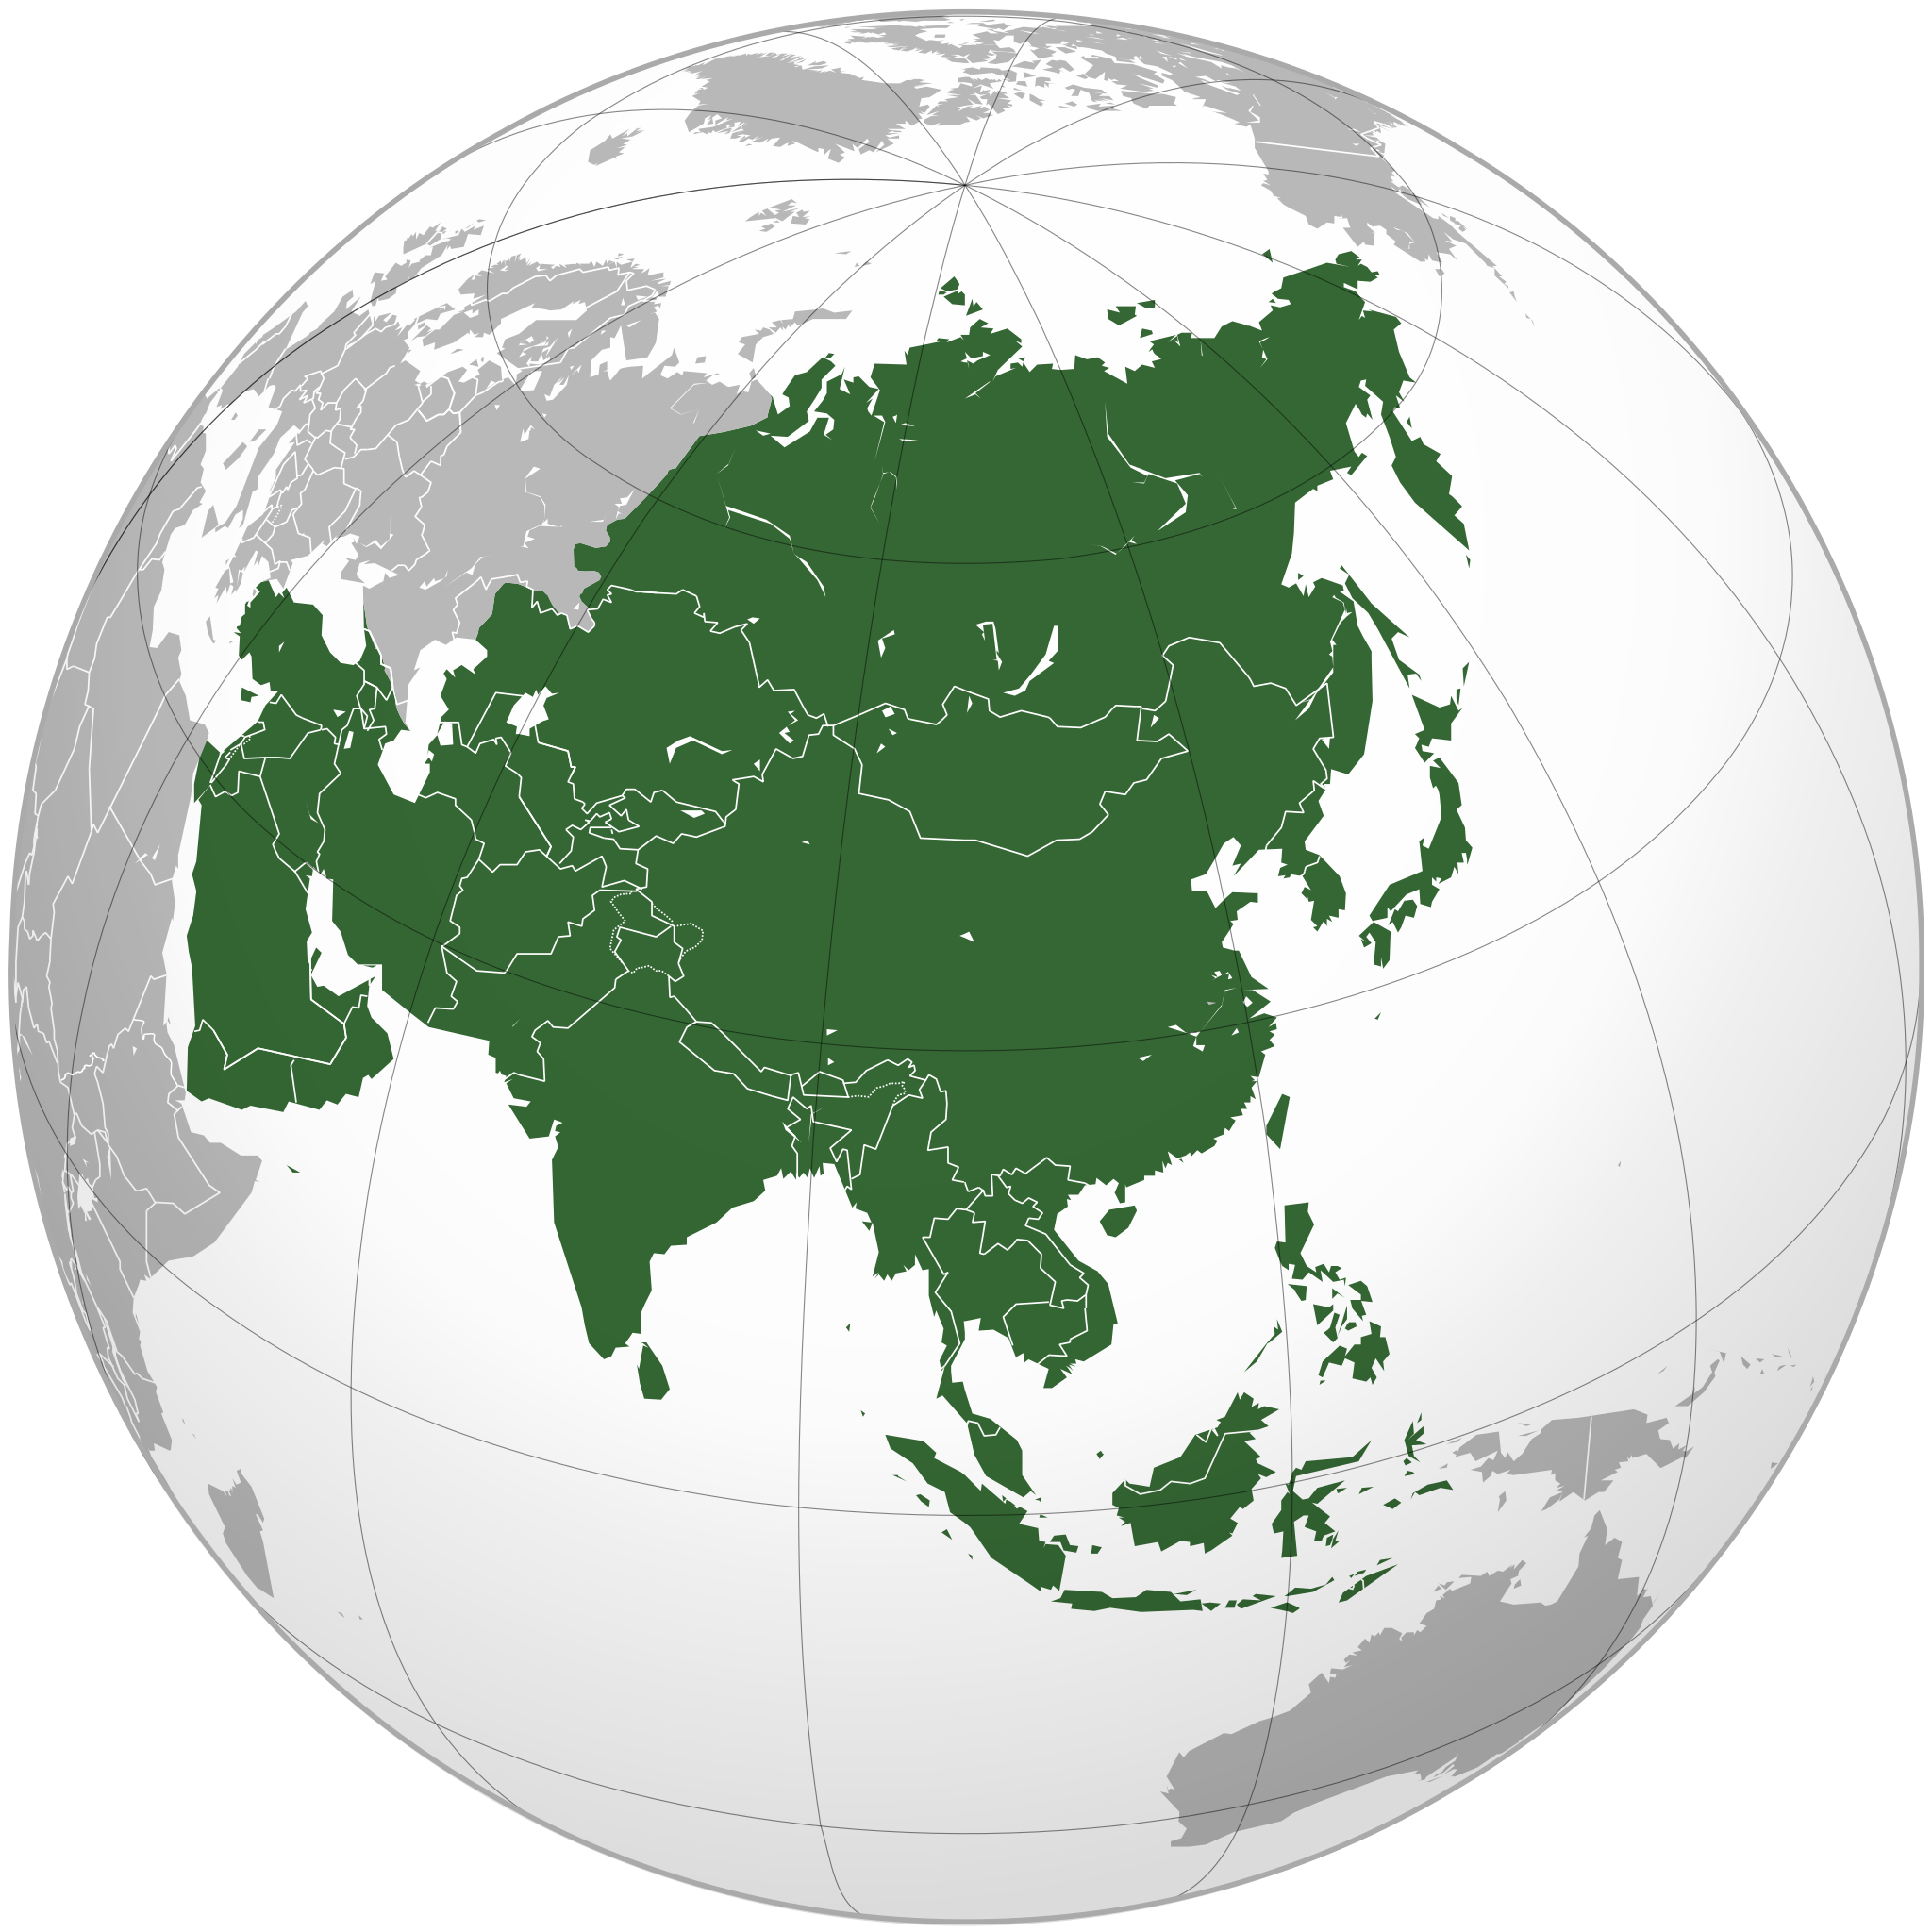 File:Asia.png